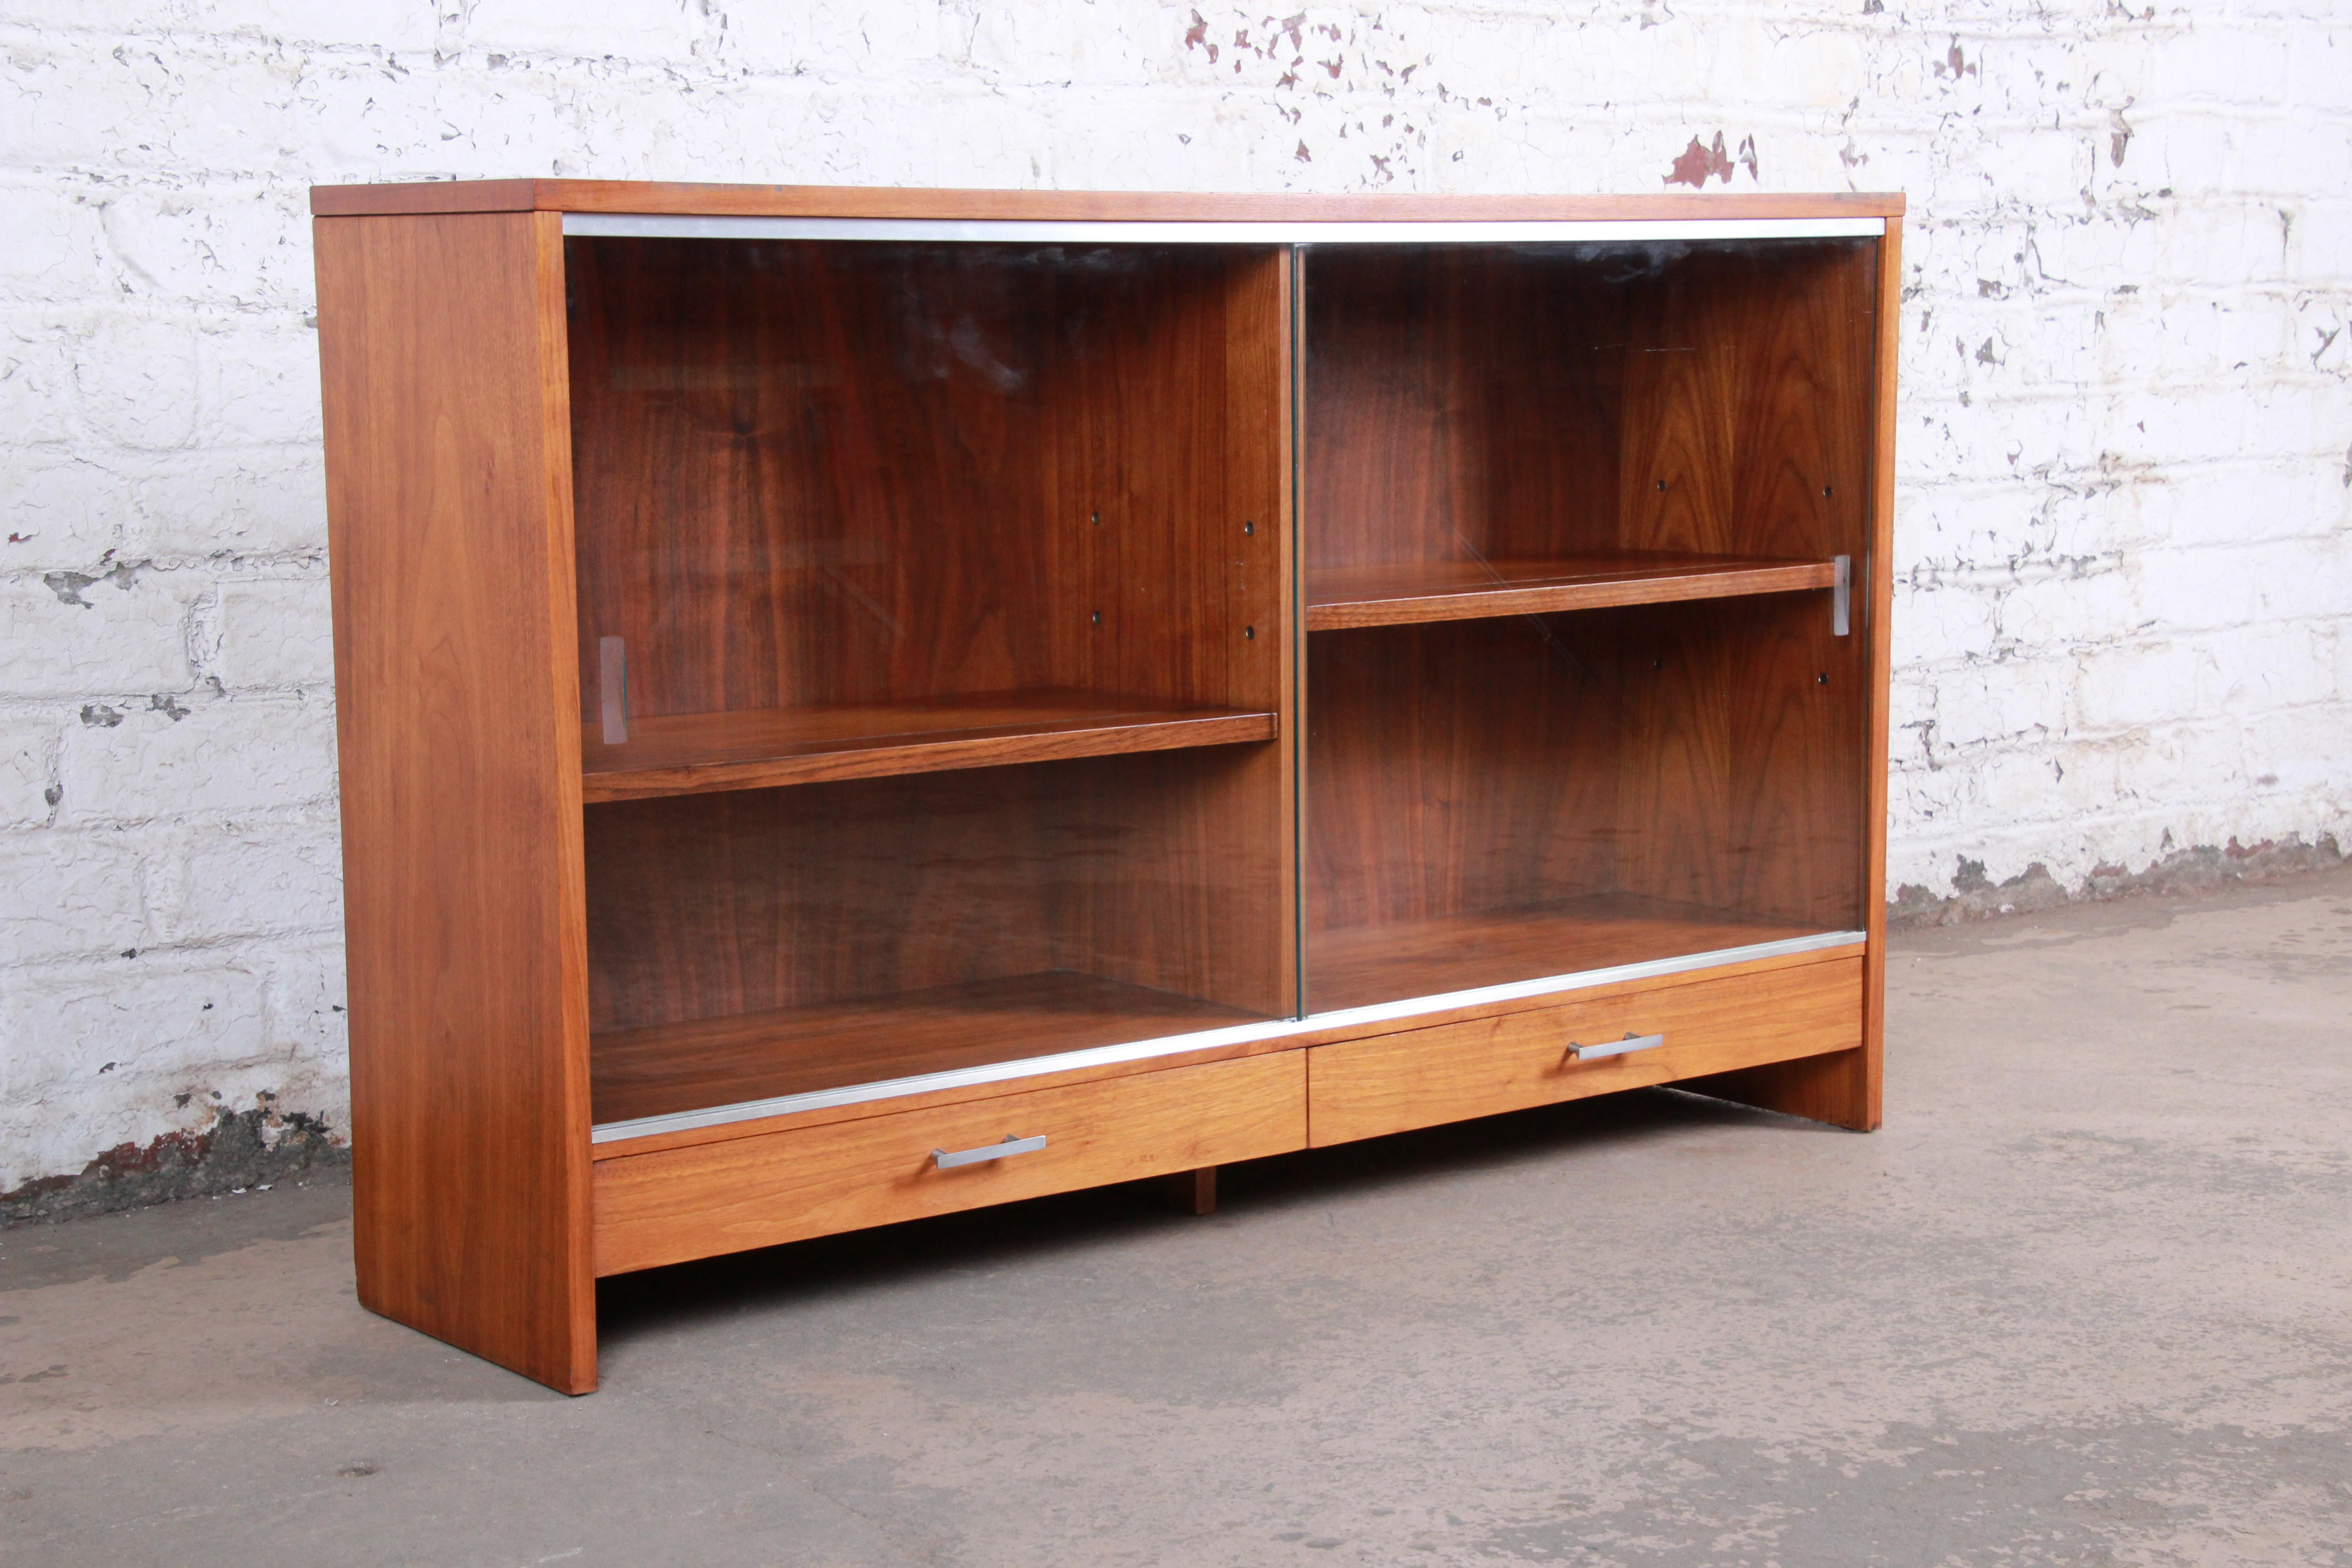 A sleek and stylish Mid-Century Modern glass front display cabinet or bookcase designed by Paul McCobb for Calvin Furniture. The bookcase features beautiful walnut wood grain, with aluminum trim and hardware. It offers good storage, with two